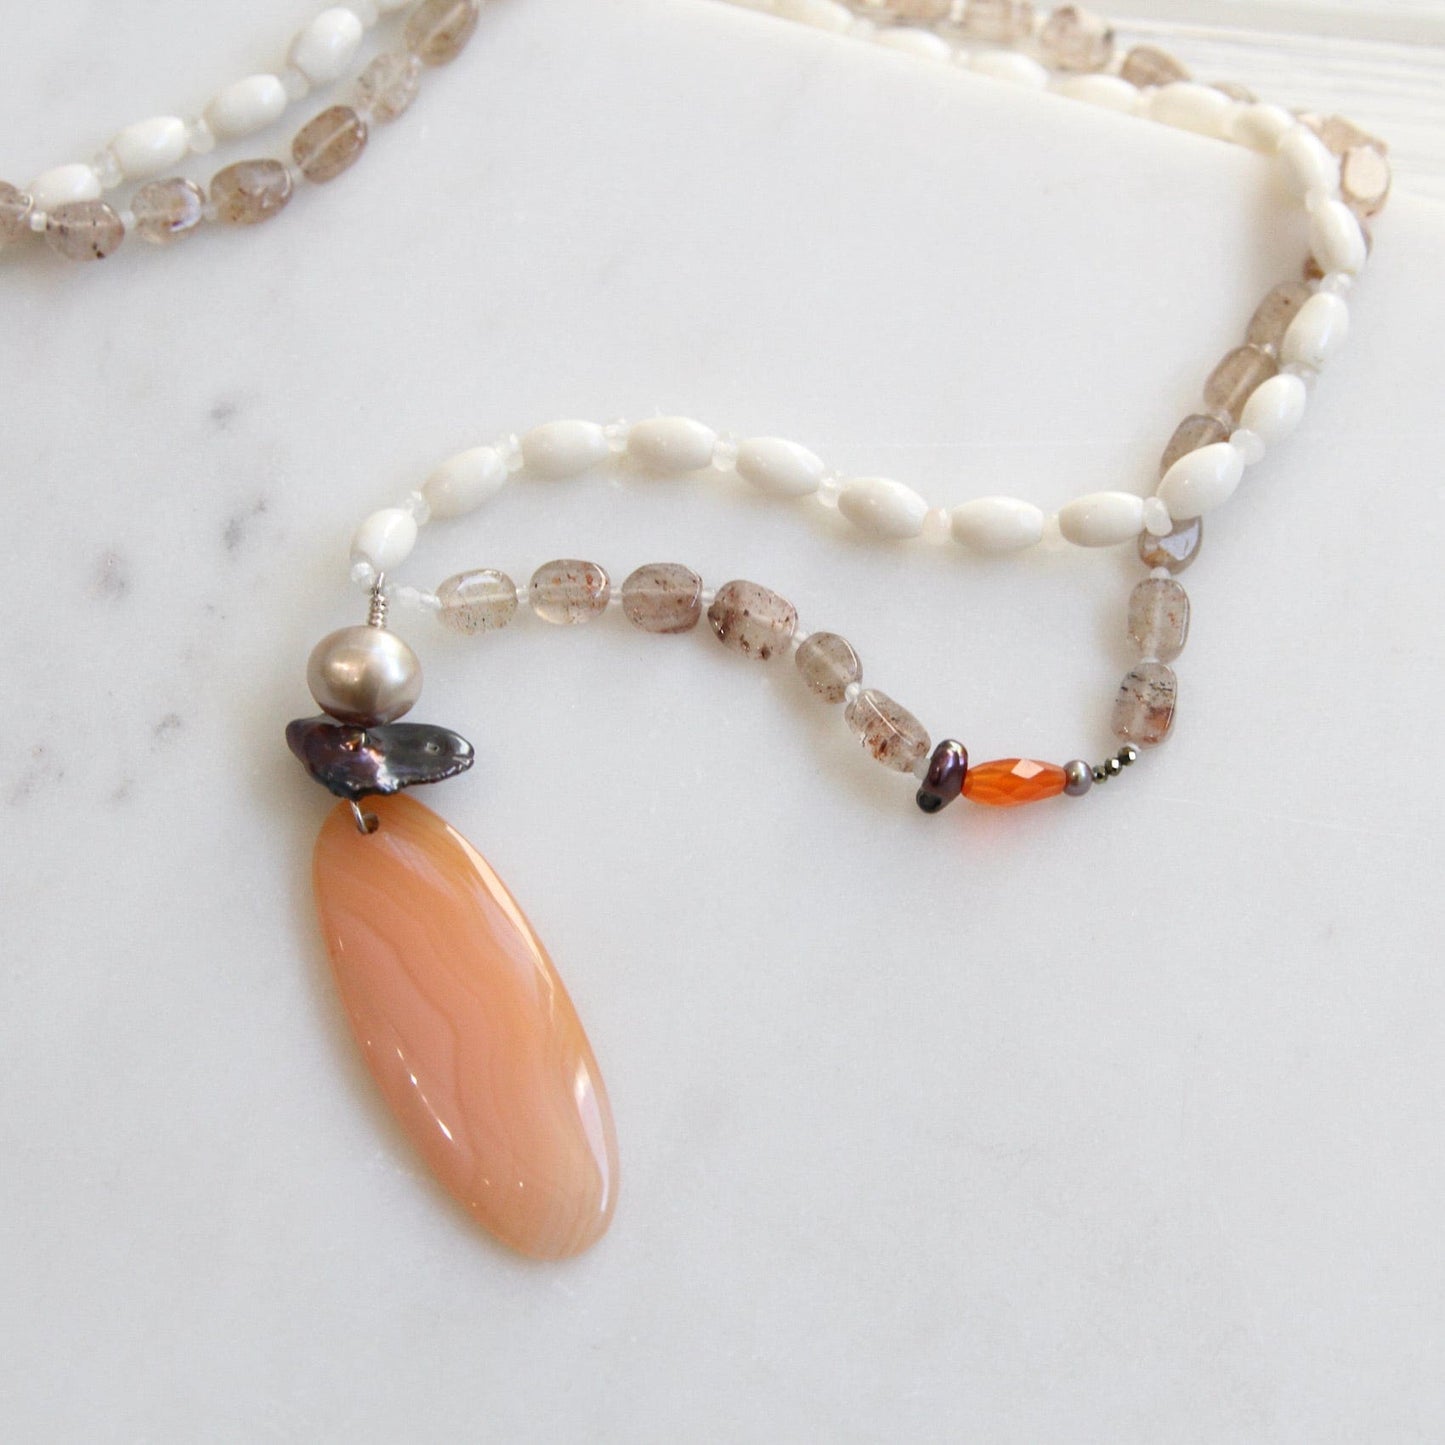 NKL Agate & Bone Necklace with Pearl & Carnelian Pendant